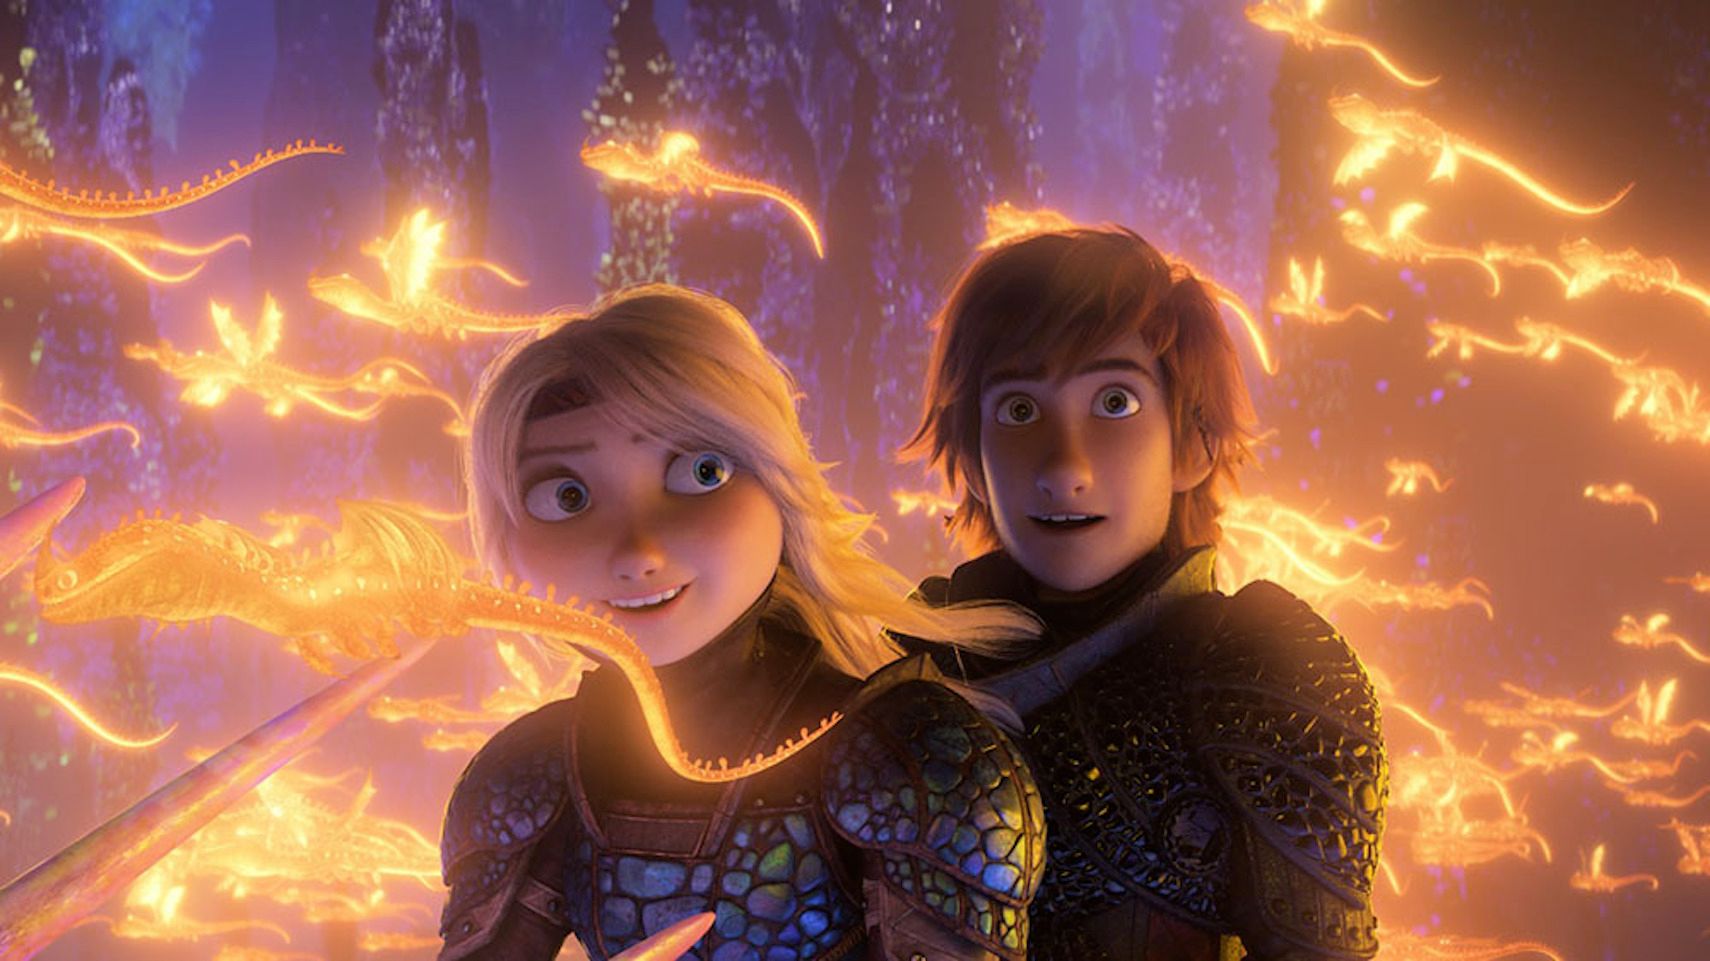 How To Train Your Dragon 5 Things That Make No Sense In The Original Film (& 5 Fan Theories That Do)